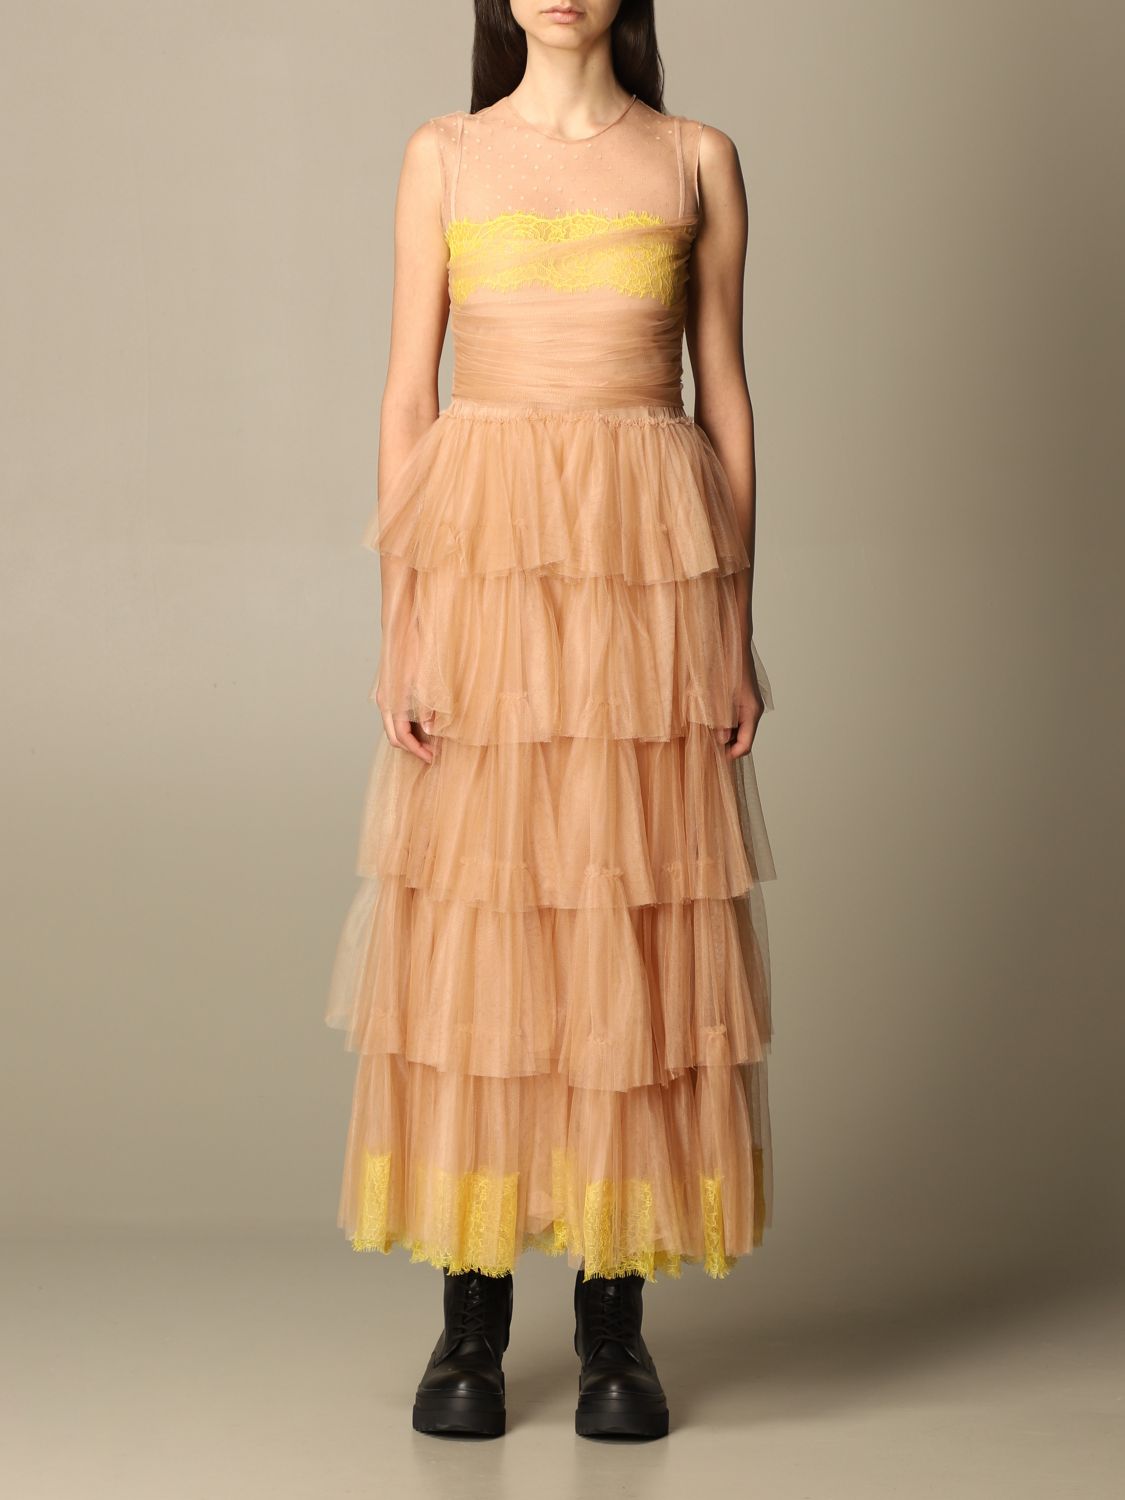 Red Valentino long dress in tulle with flounces